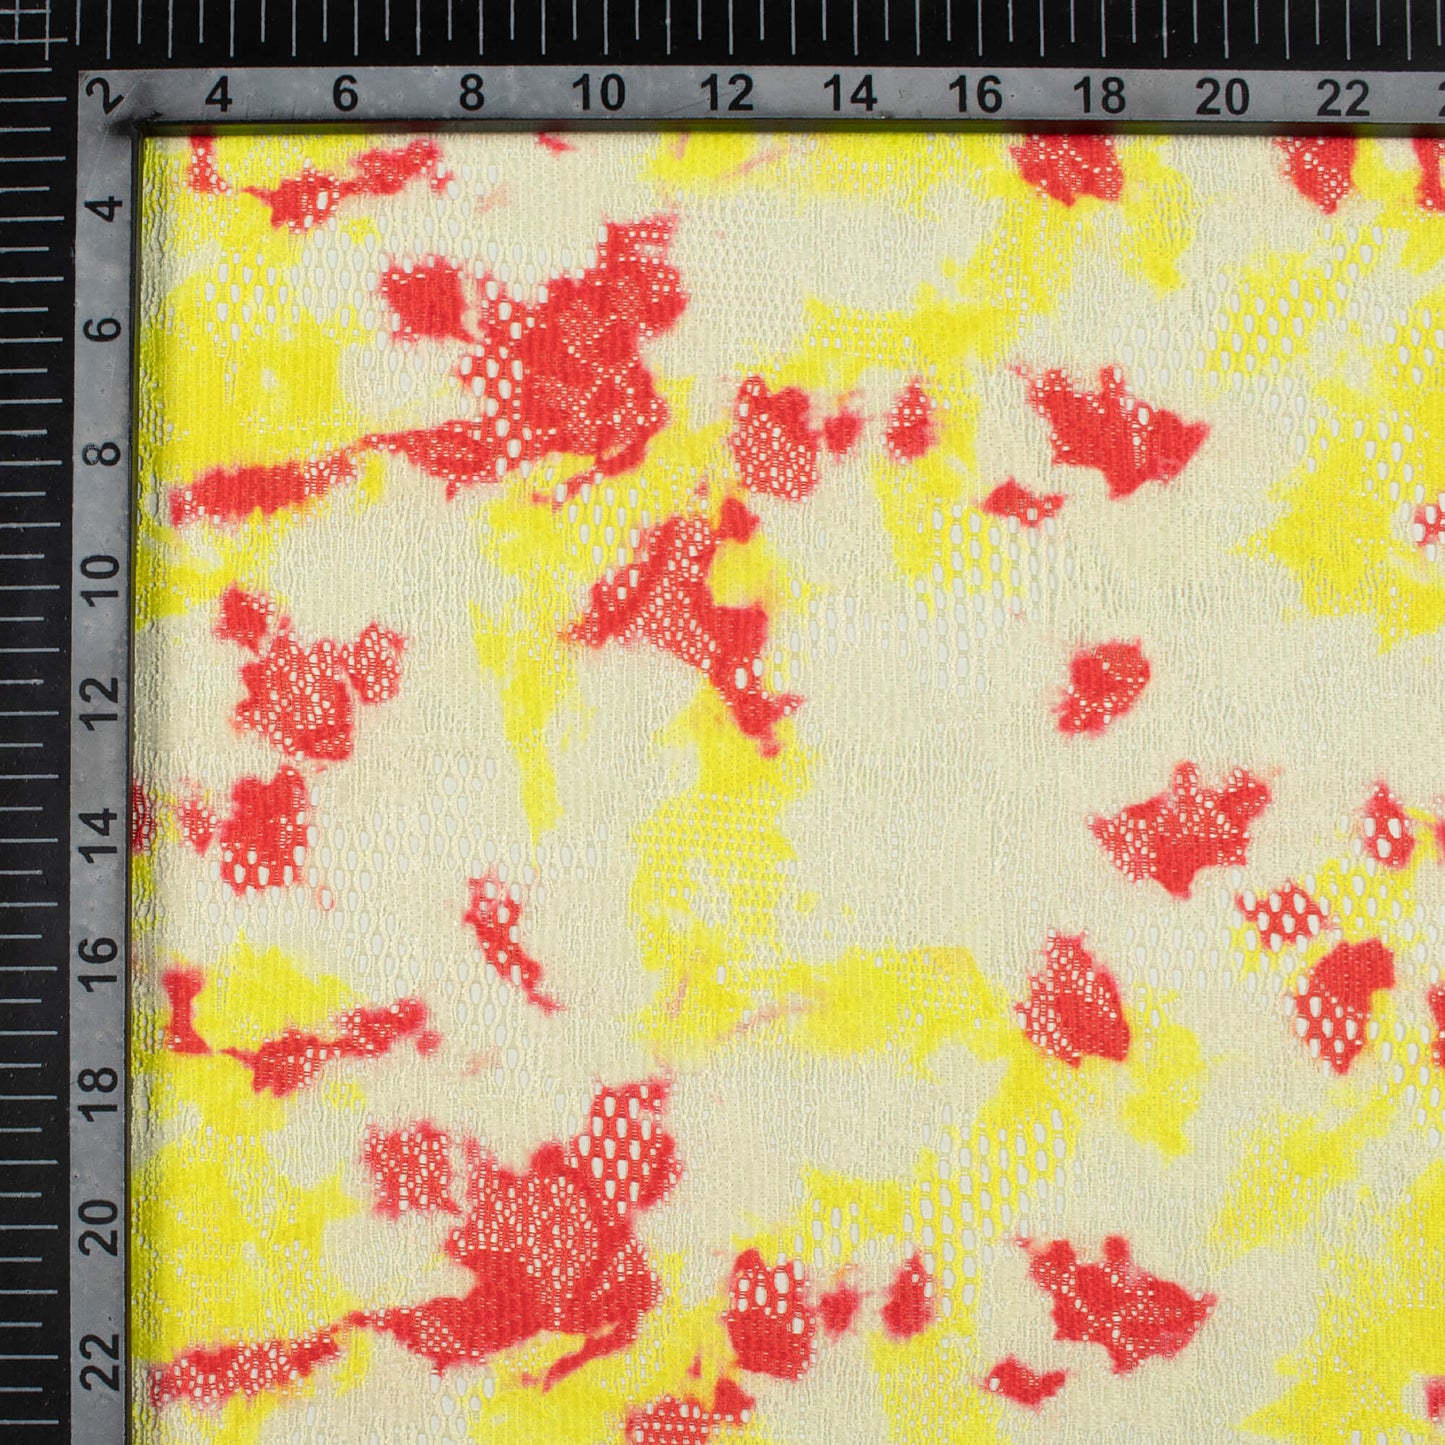 Candy Red And Lemon Yellow Tie & Dye Pattern Digital Print Floral Raschel Net Fabric (Width 58 Inches)